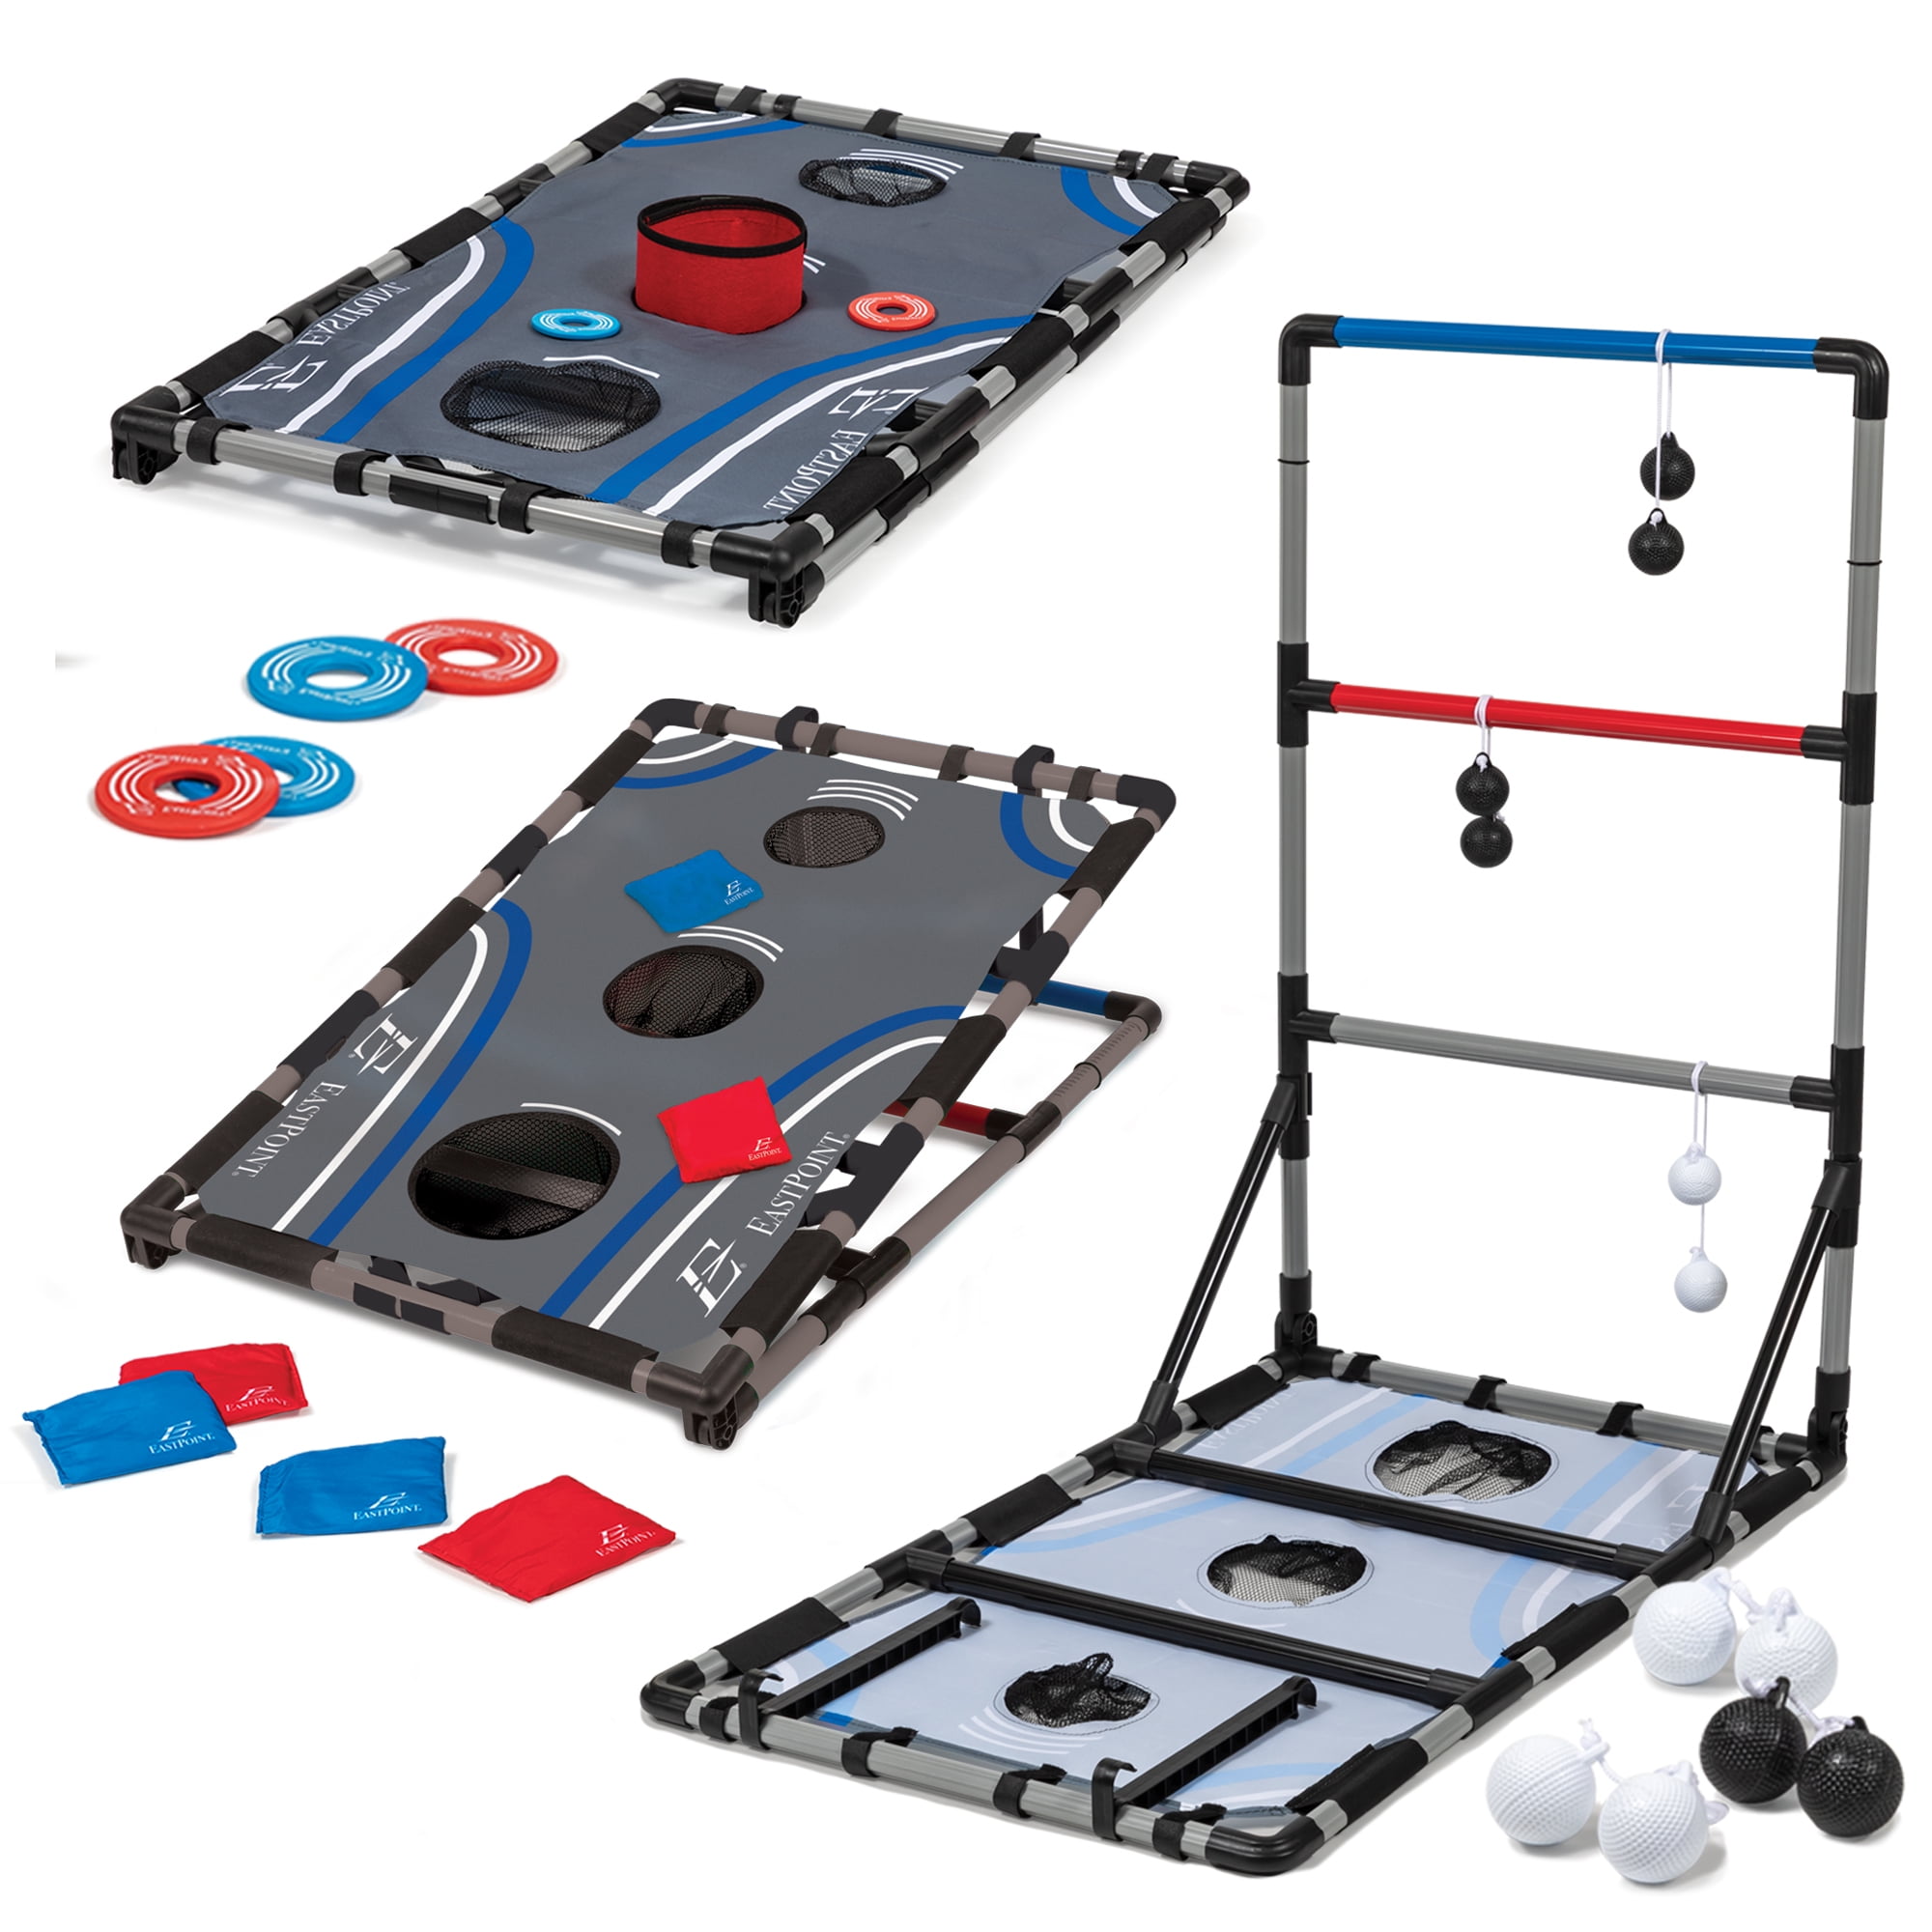 EastPoint Sports 3-in-1 Tailgate Game Set (Cornhole, Ladderball, Washer Toss) $25.76 + Free S&H w/ Walmart+ or $35+